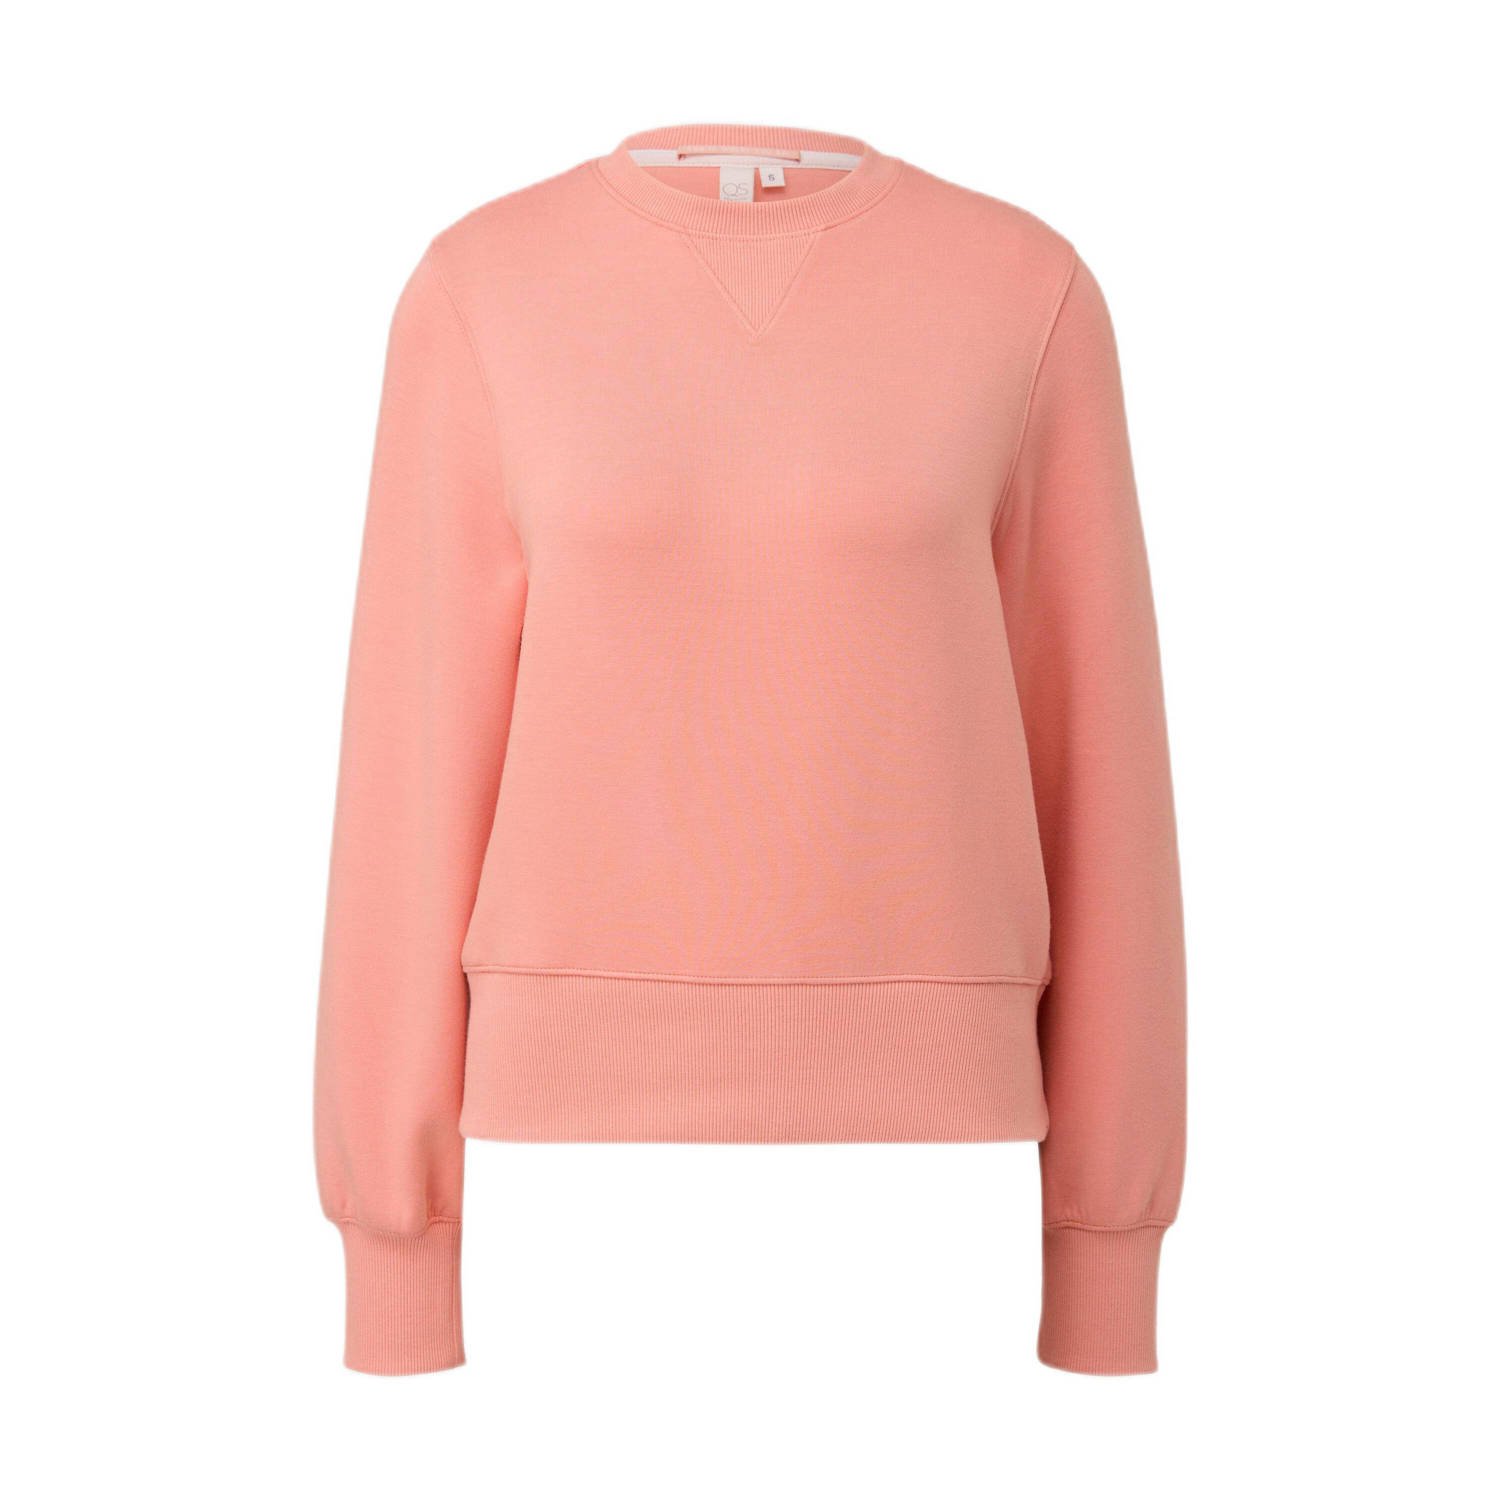 Q S by s.Oliver sweater zalm